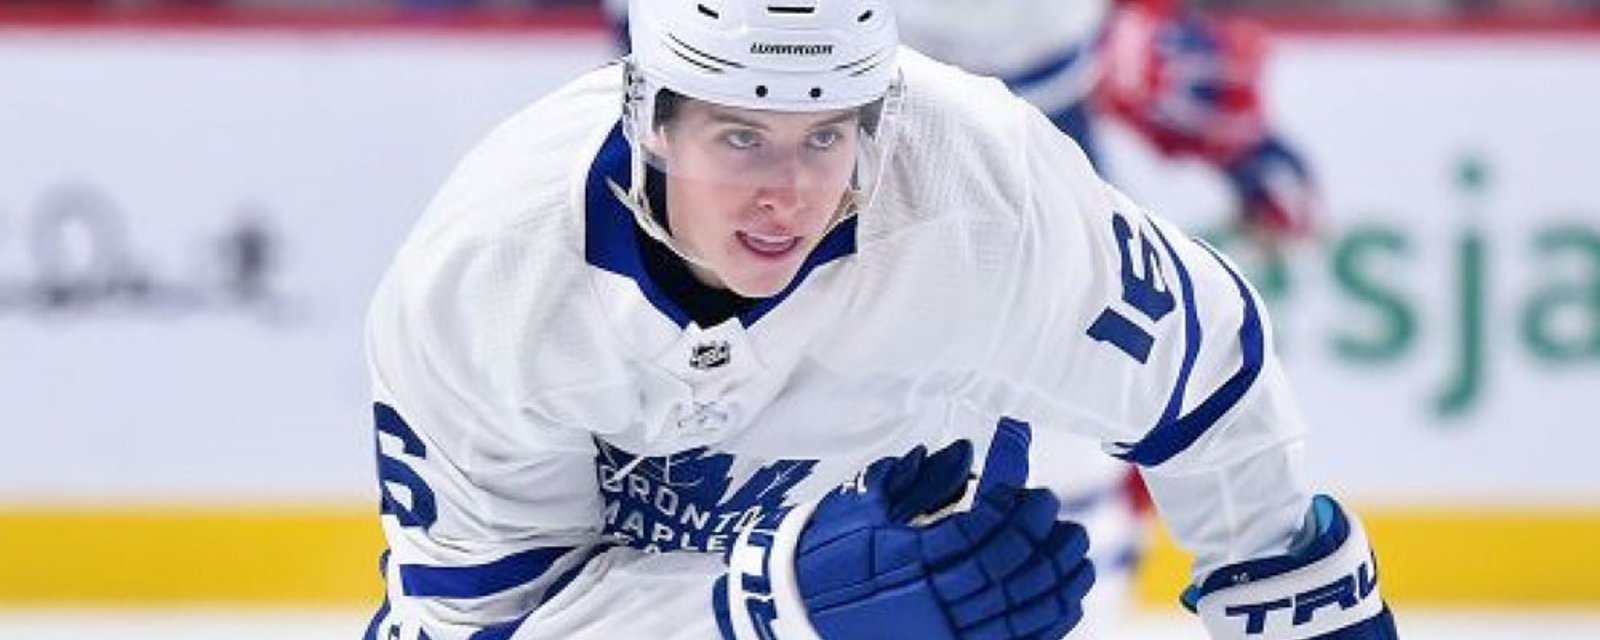 Rumor: Leafs rival reportedly ready to sign Marner to $13 million annual contract